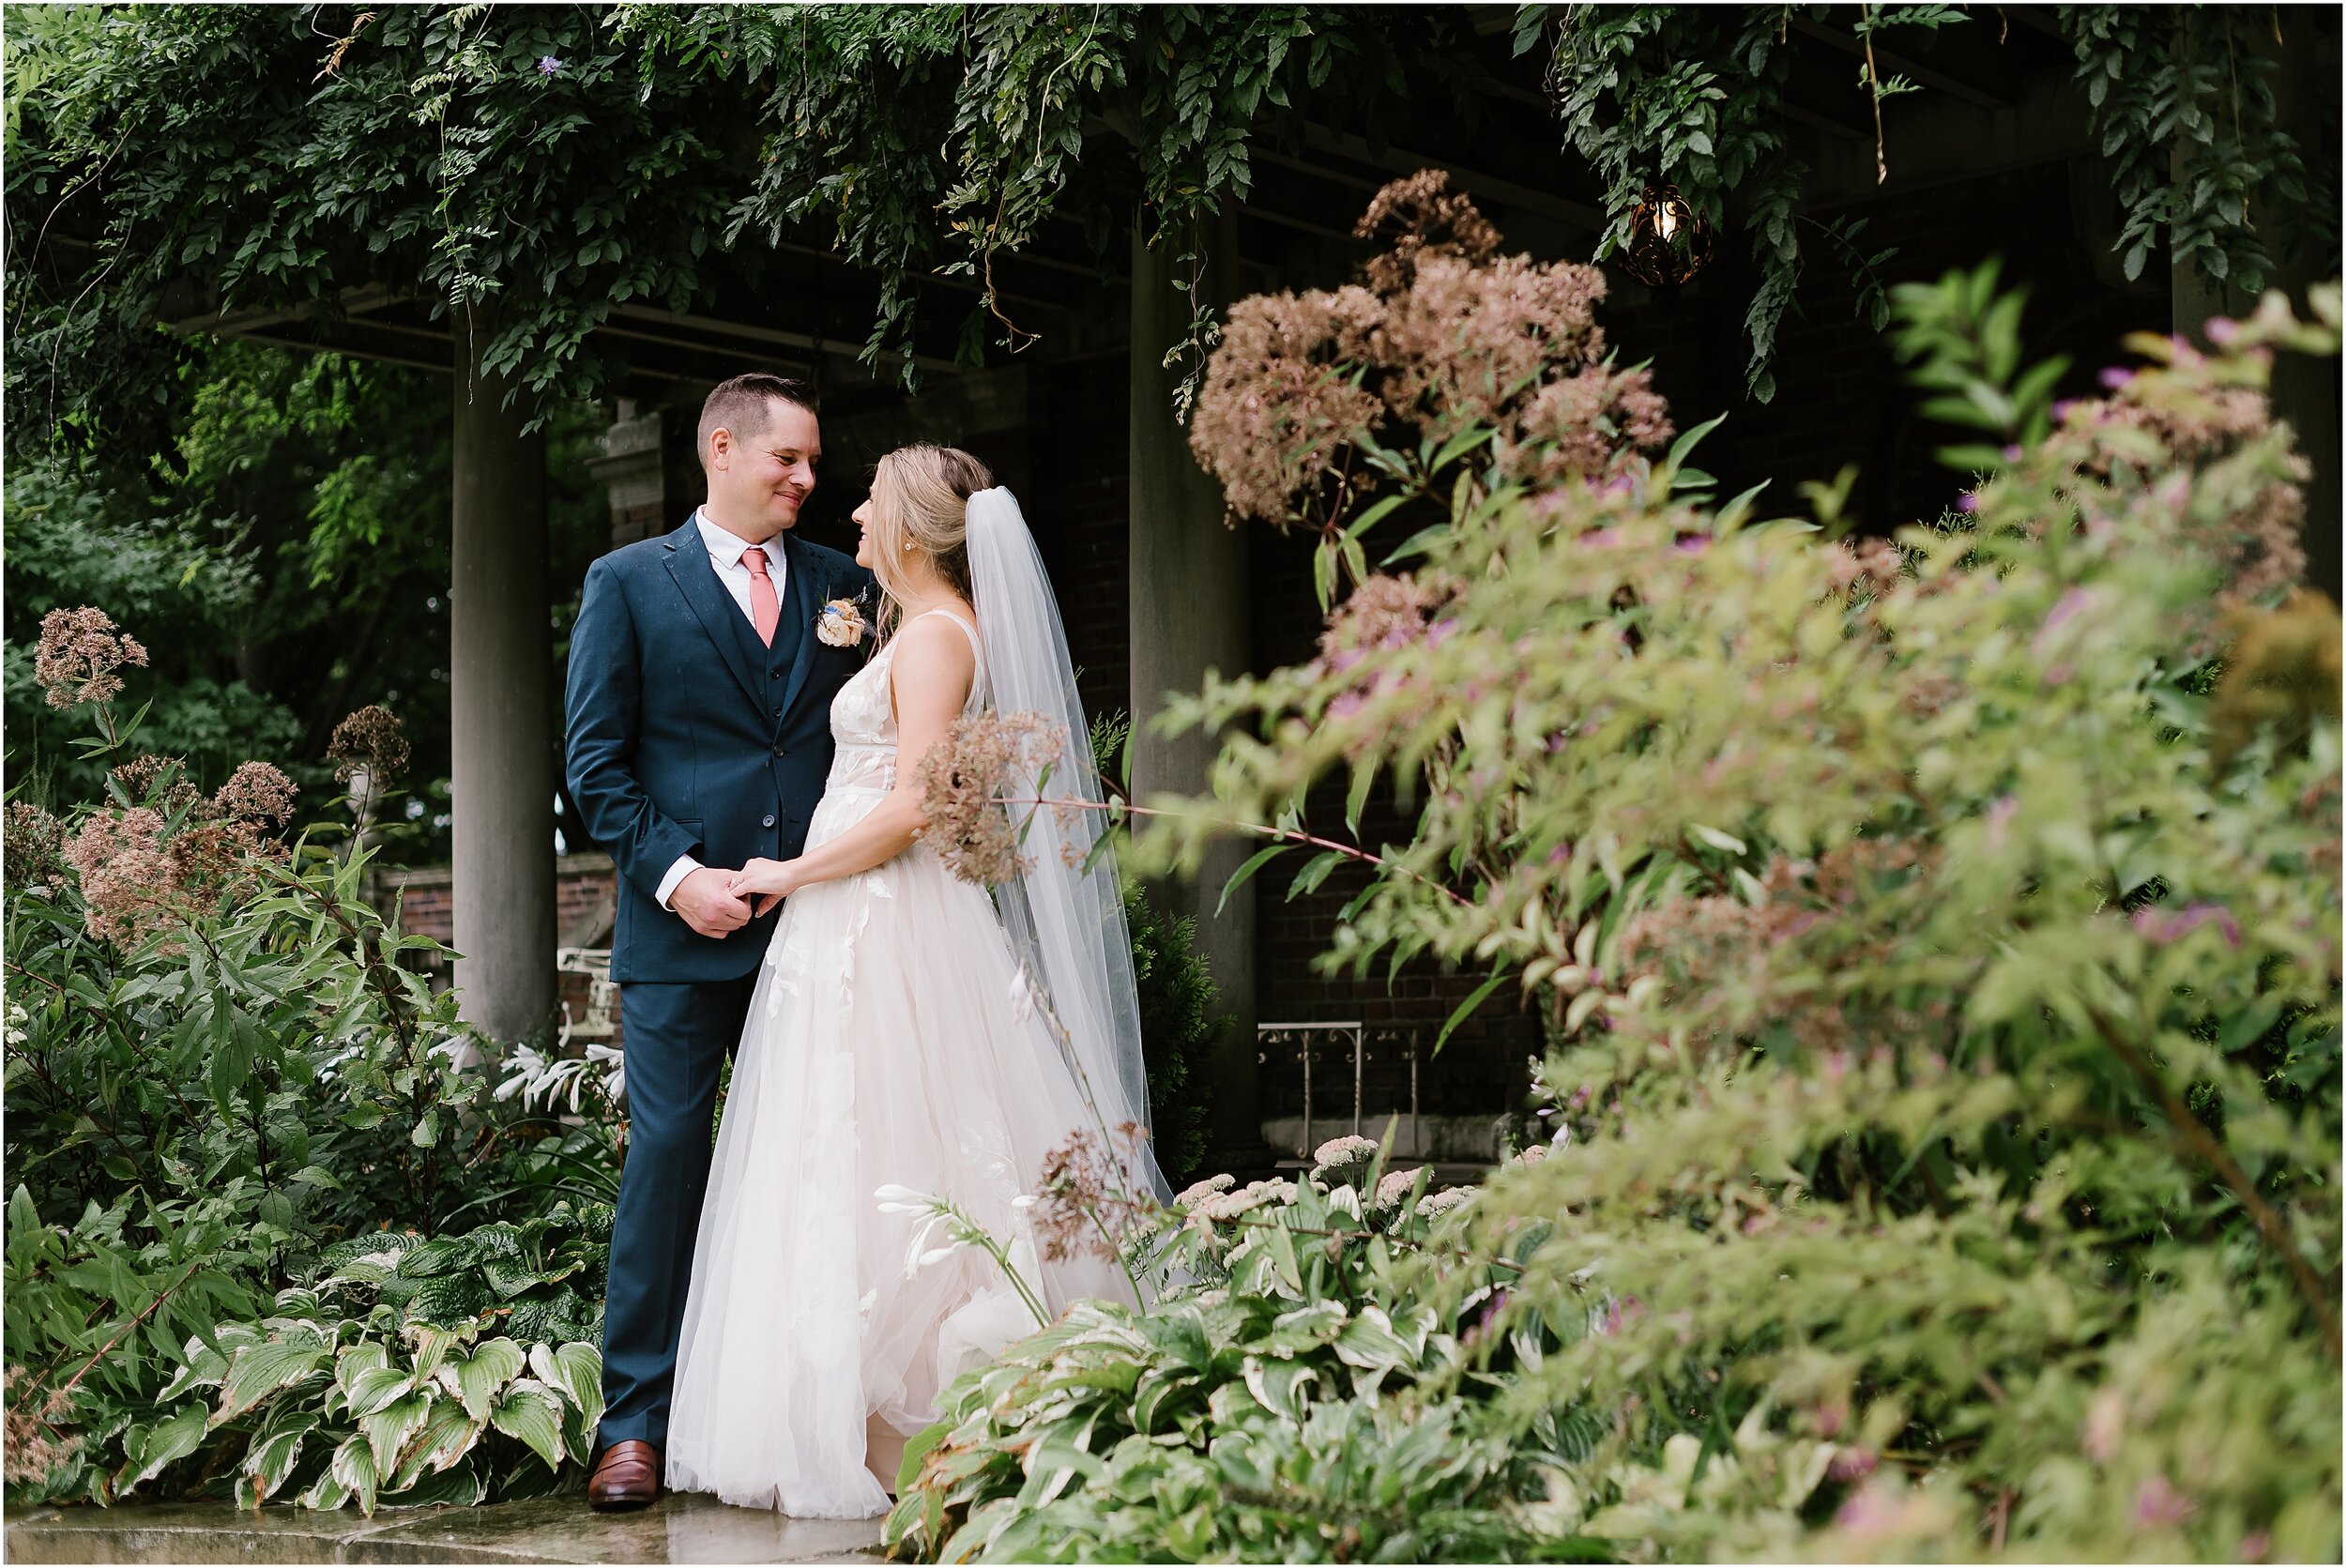 Rebecca Shehorn Photography Colleen and Kyle Inn at Irwin Gardens Wedding-684_The Commons Columbus Inn at Irwin Garden Indianapolis Wedding Photographer.jpg